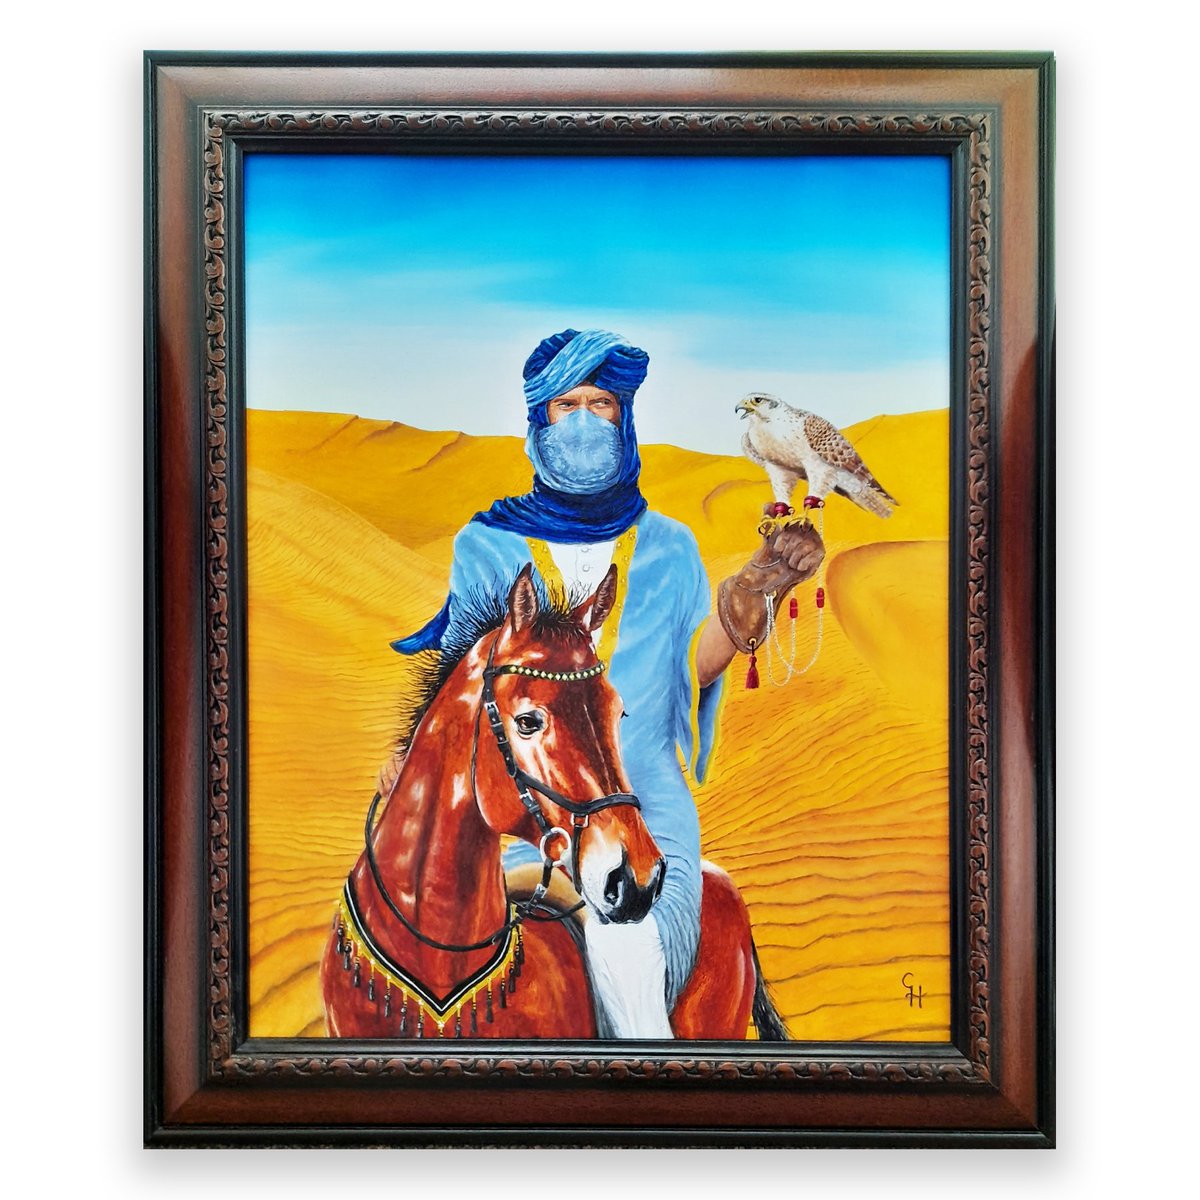 Falconry is a way of life in Arabia, (especially amongst the elite and royalty) Original Painting size: 51cm x 41cm (20in x 16in), Framed size: 61cm x 51cm (24in x 20in) (Framed fine art prints are available) £300-00 Buy now at newartgallery.co.uk